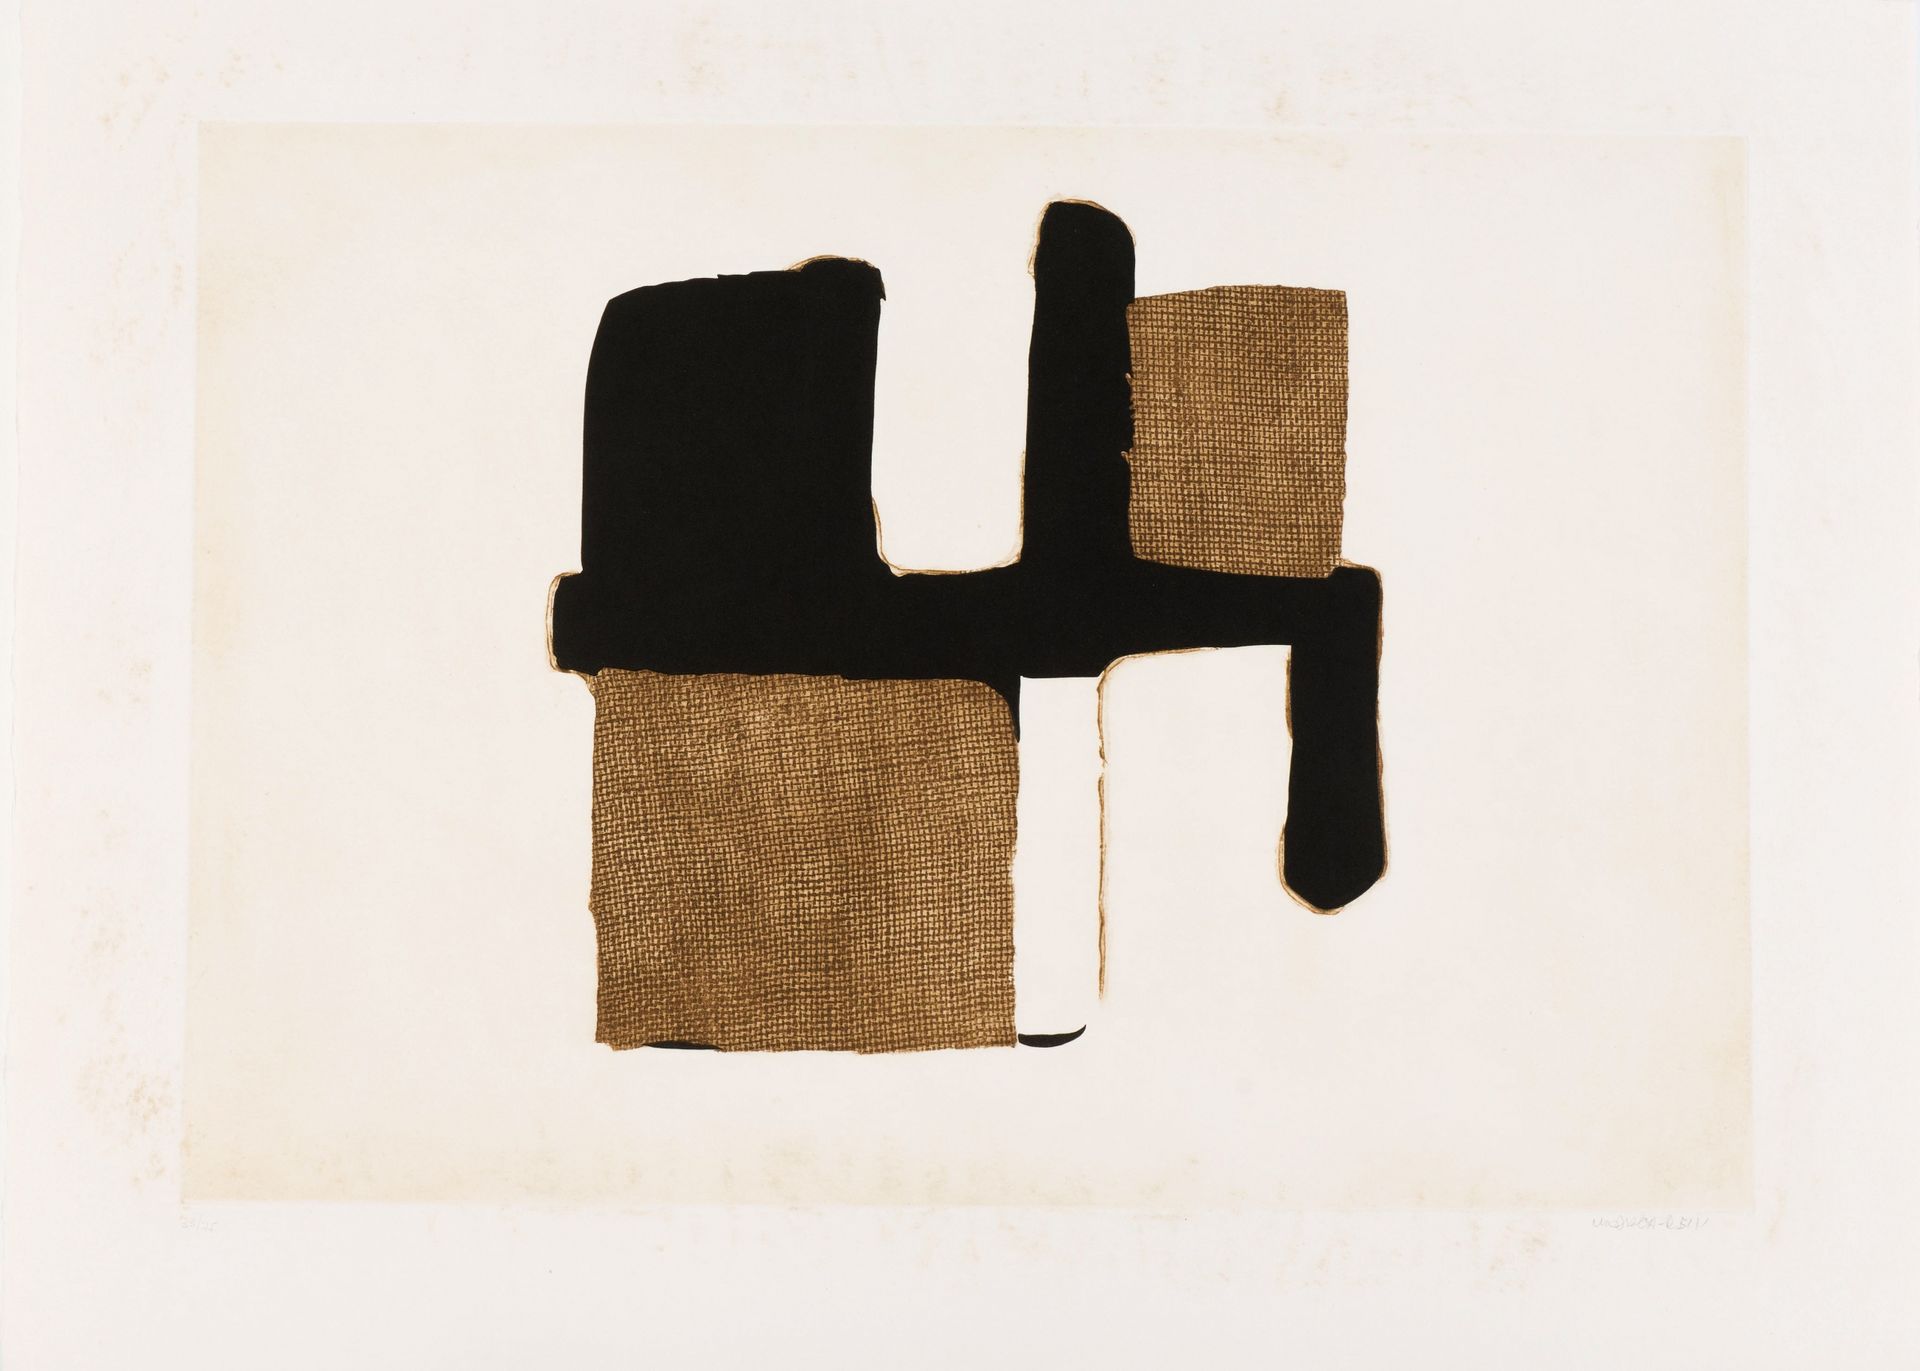 Conrad MARCA-RELLI Conrad MARCA-RELLI

Composition 2, 1977

Etching and aquatint&hellip;